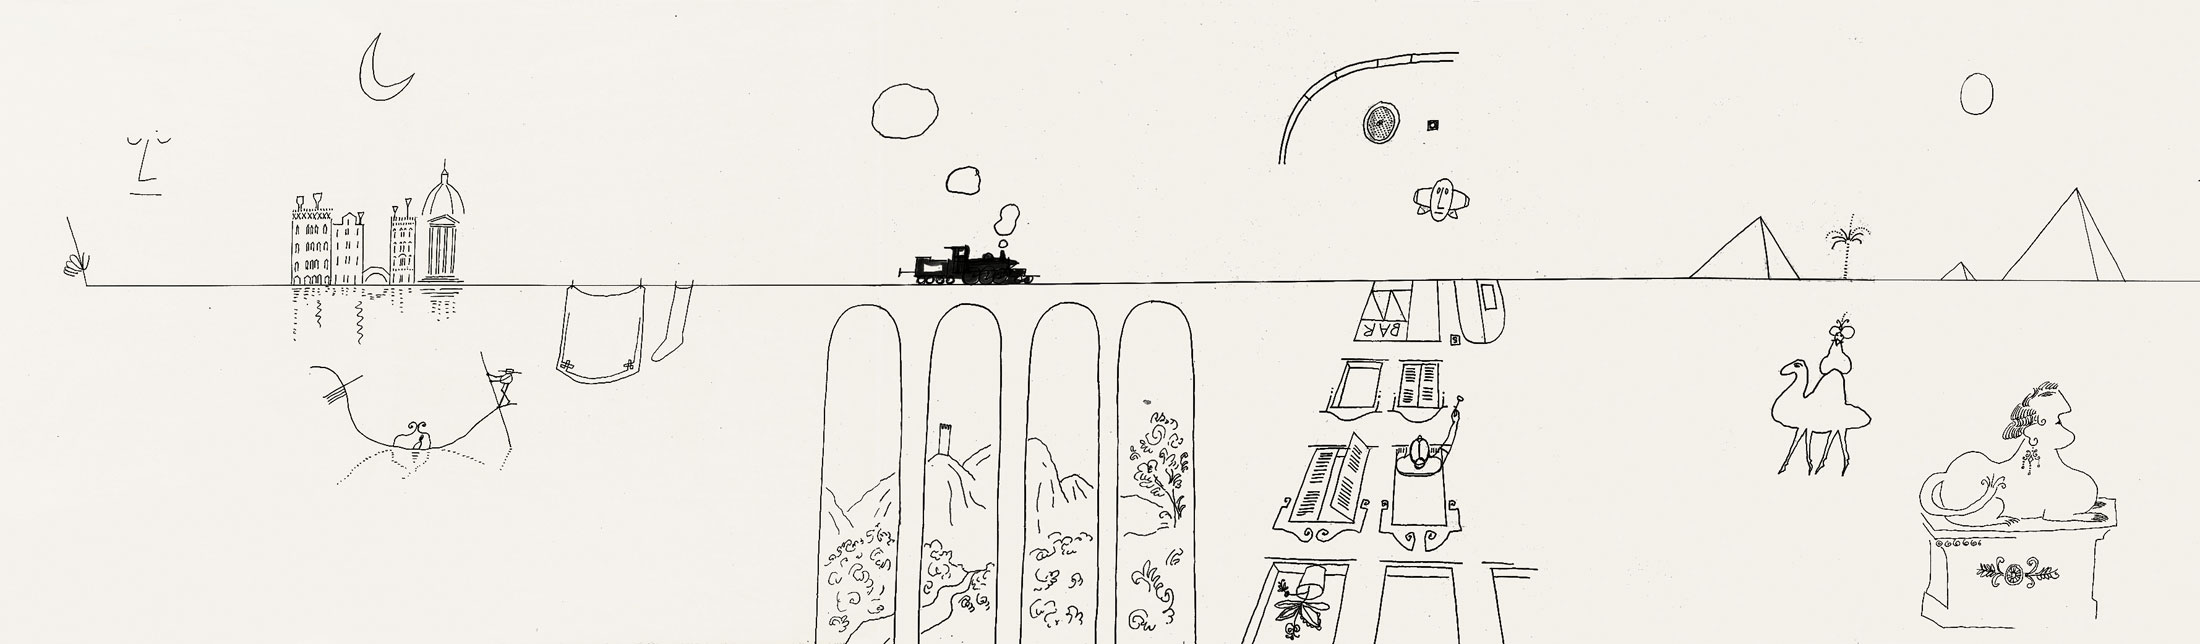 First part of the drawing for <em>The Line</em>, 1954. Full drawing: ink on paper folded into 29 sections, 18 x 404 in. The Saul Steinberg Foundation.